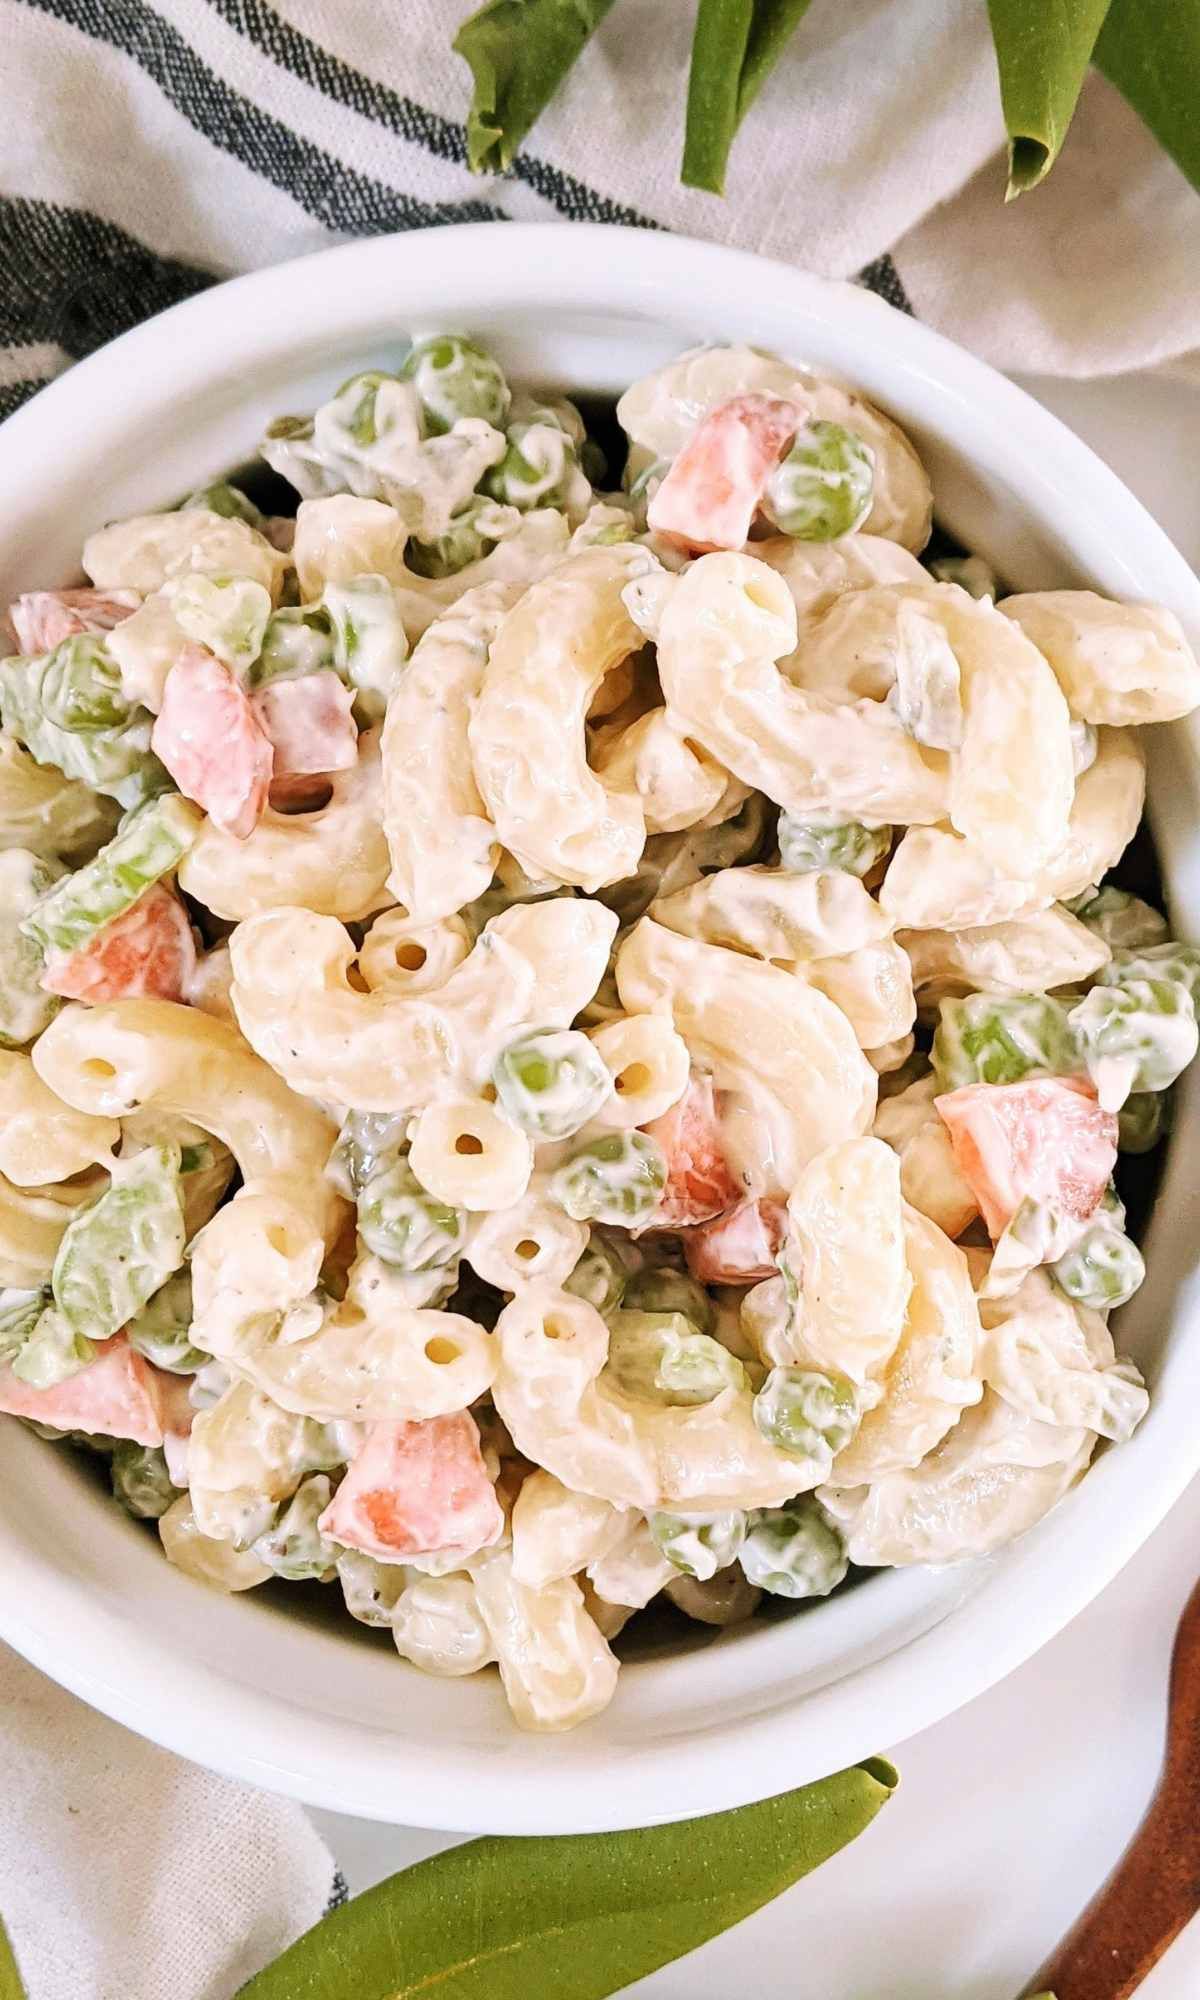 mac and pea salad recipe dairy free vegan ranch dressing pasta salad recipe gluten free pasta salads for entertaining summer side dish recipes macaroni salad with peas and ranch